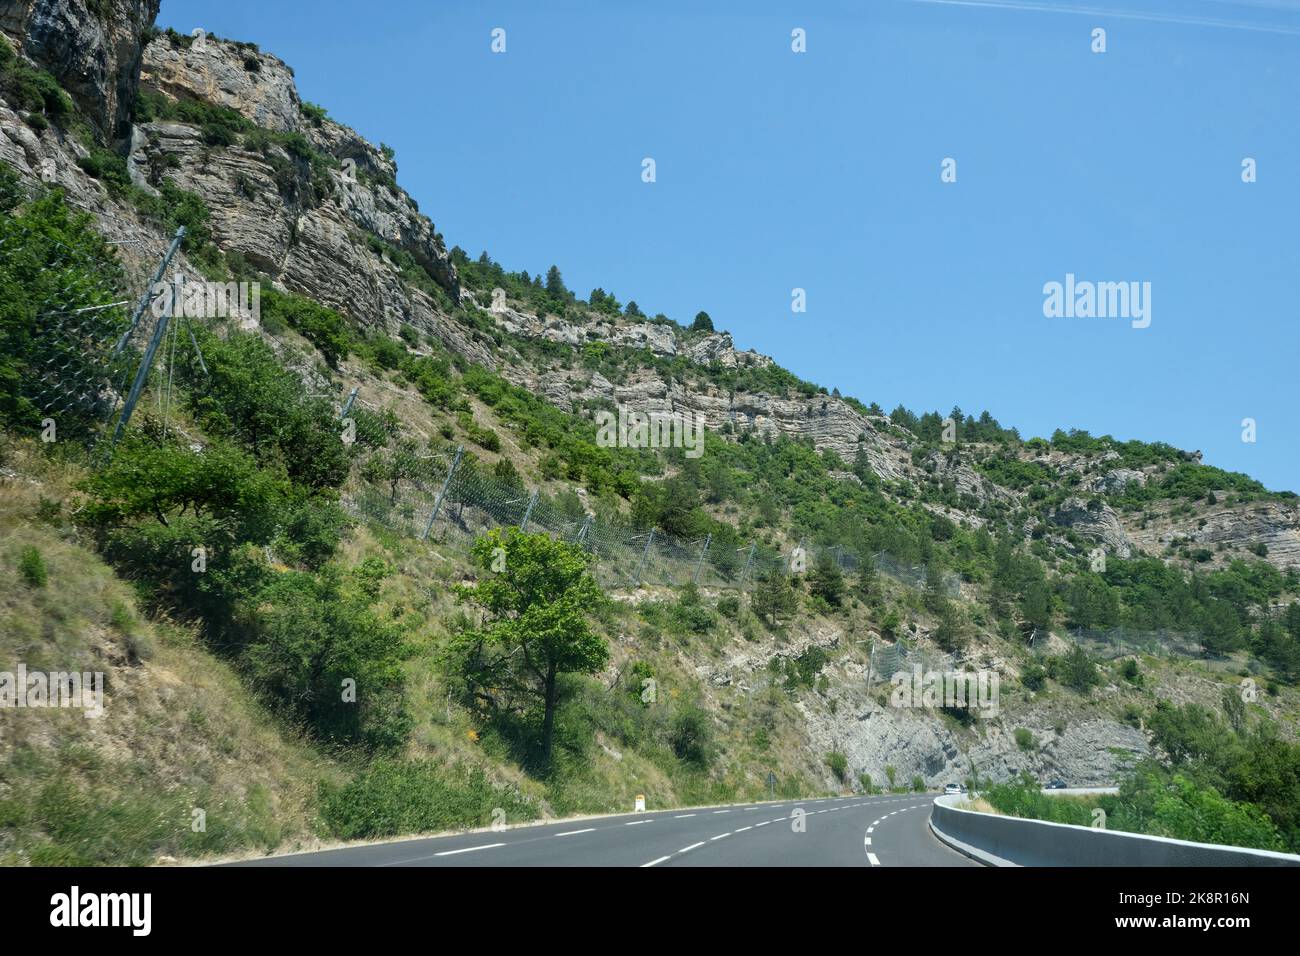 Mountain with safety fence to protect the road and cars from falling rocks. Heavy duty wire netting used to catch falling rocks from the cliffs in Stock Photo